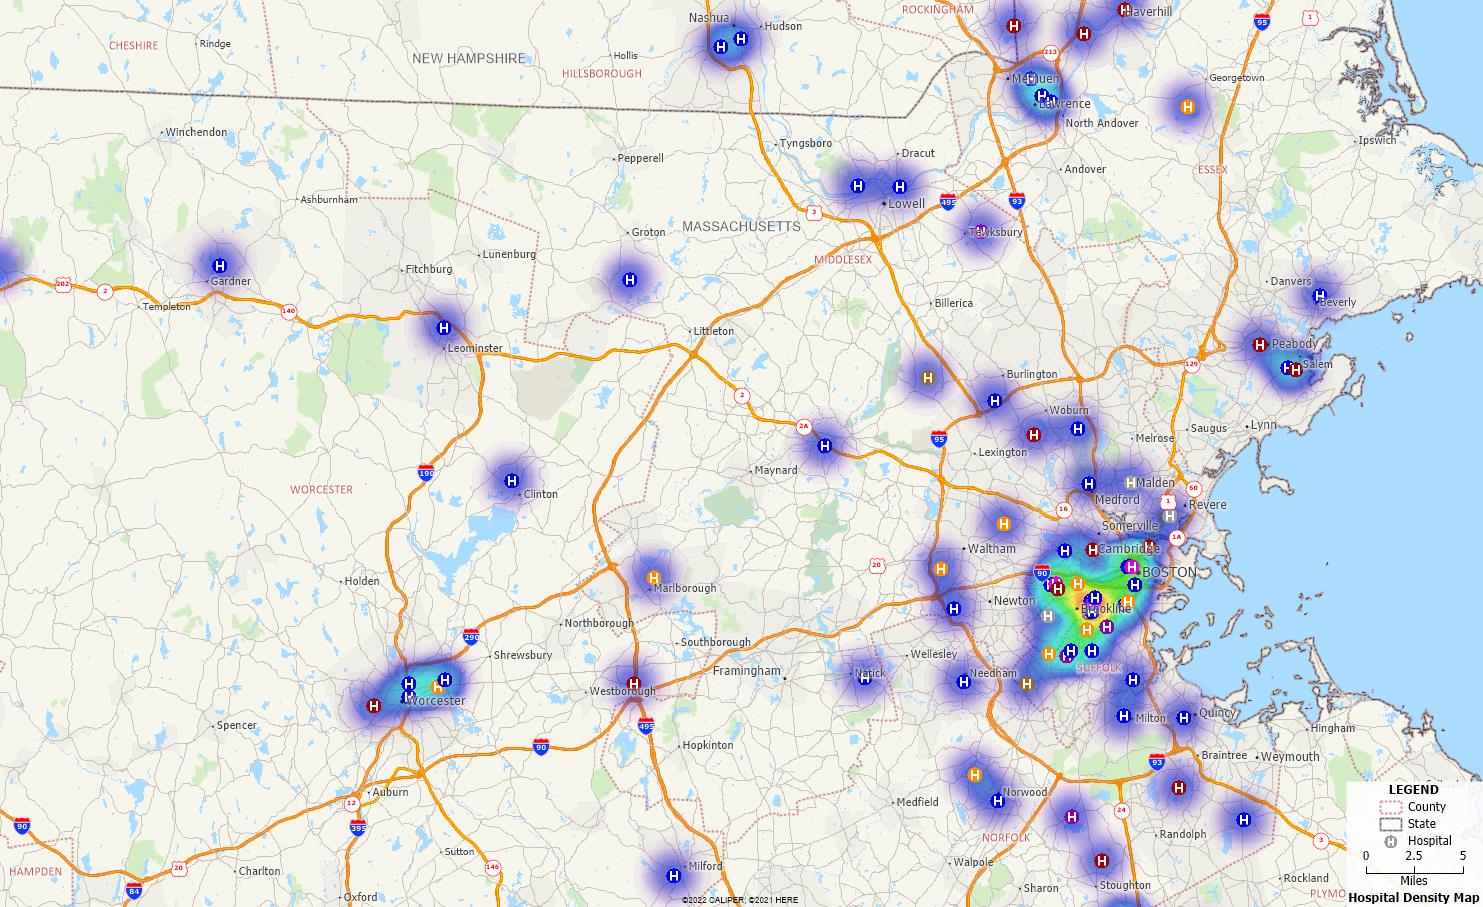 How do I create a density or heat map of my locations? Heat map of hospitals.